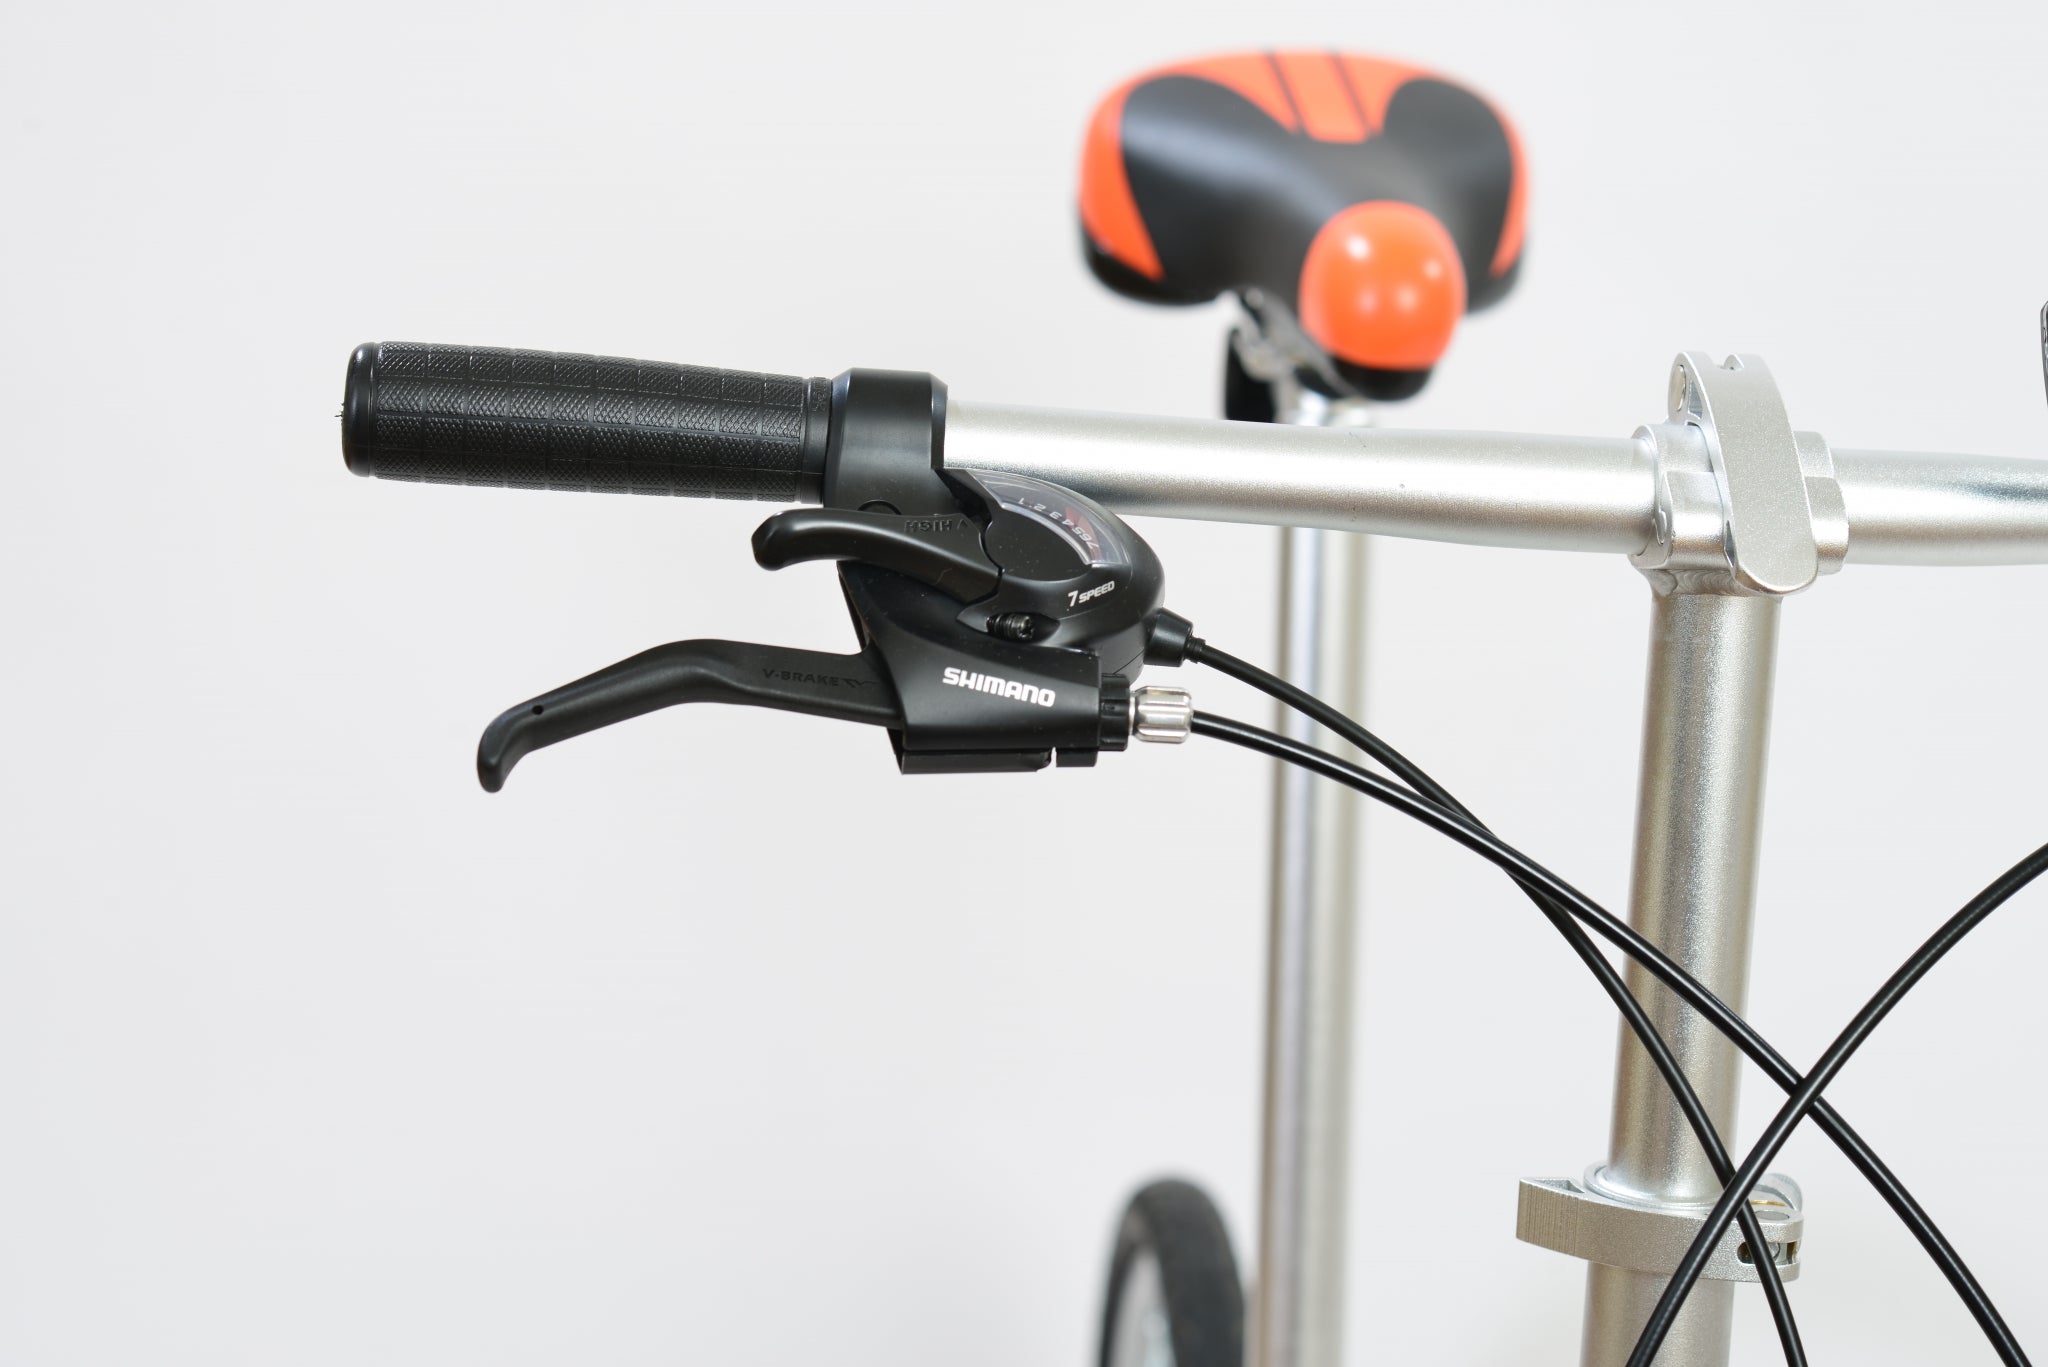 Right handlebar of a folding bicycle with a black and orange seat post.